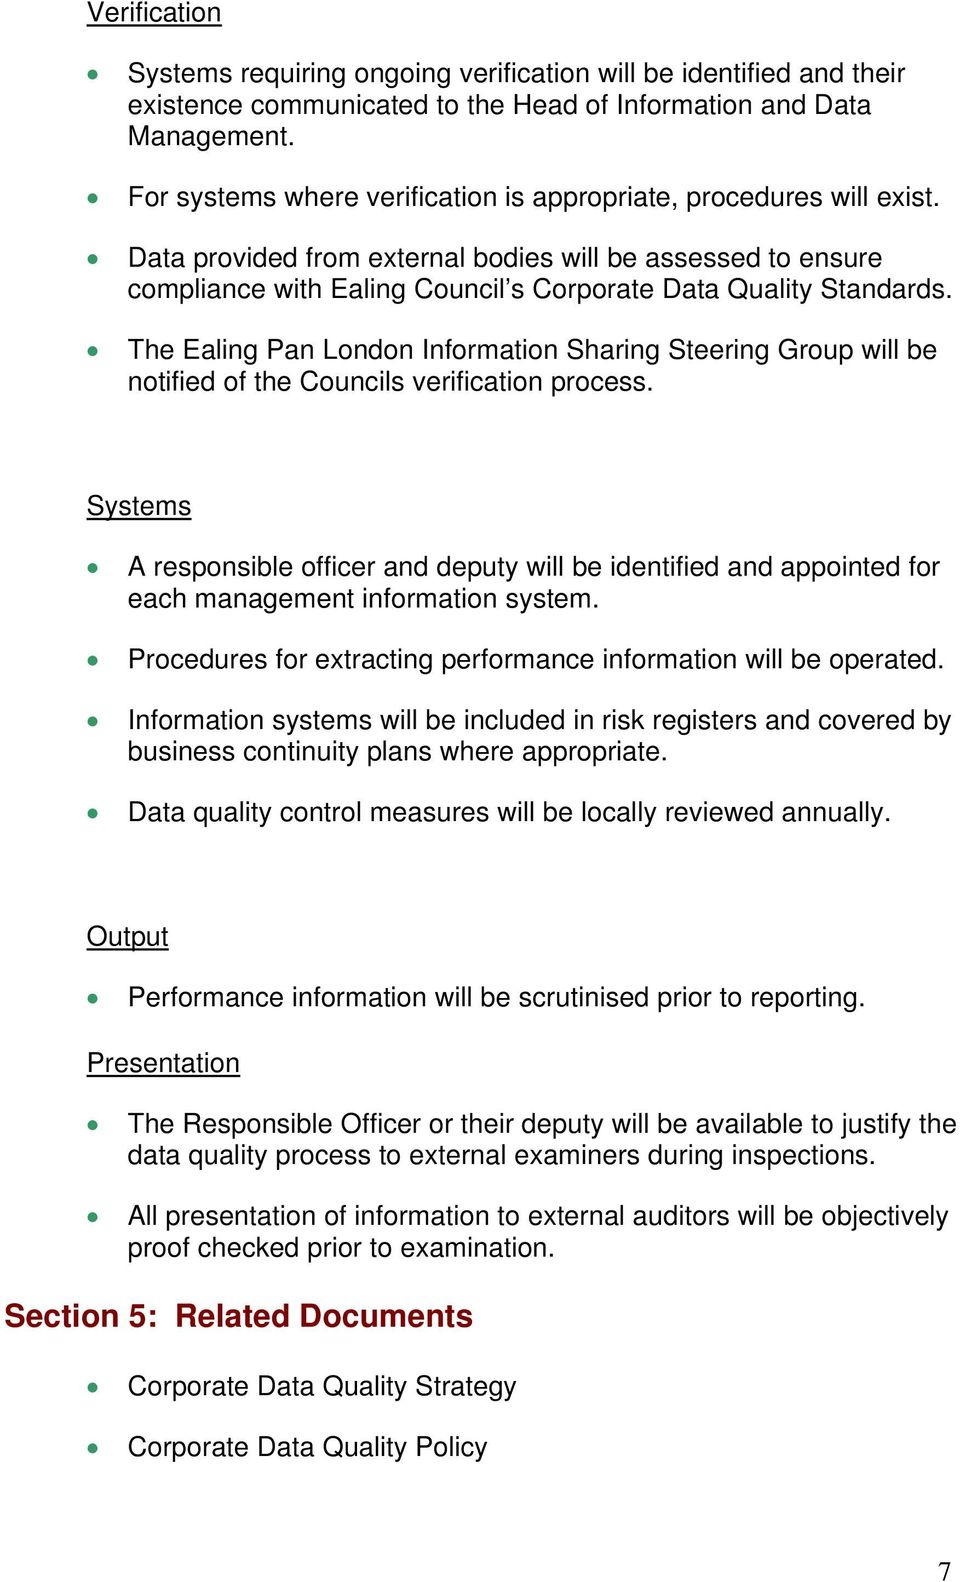 The Ealing Pan London Information Sharing Steering Group will be notified of the Councils verification process.